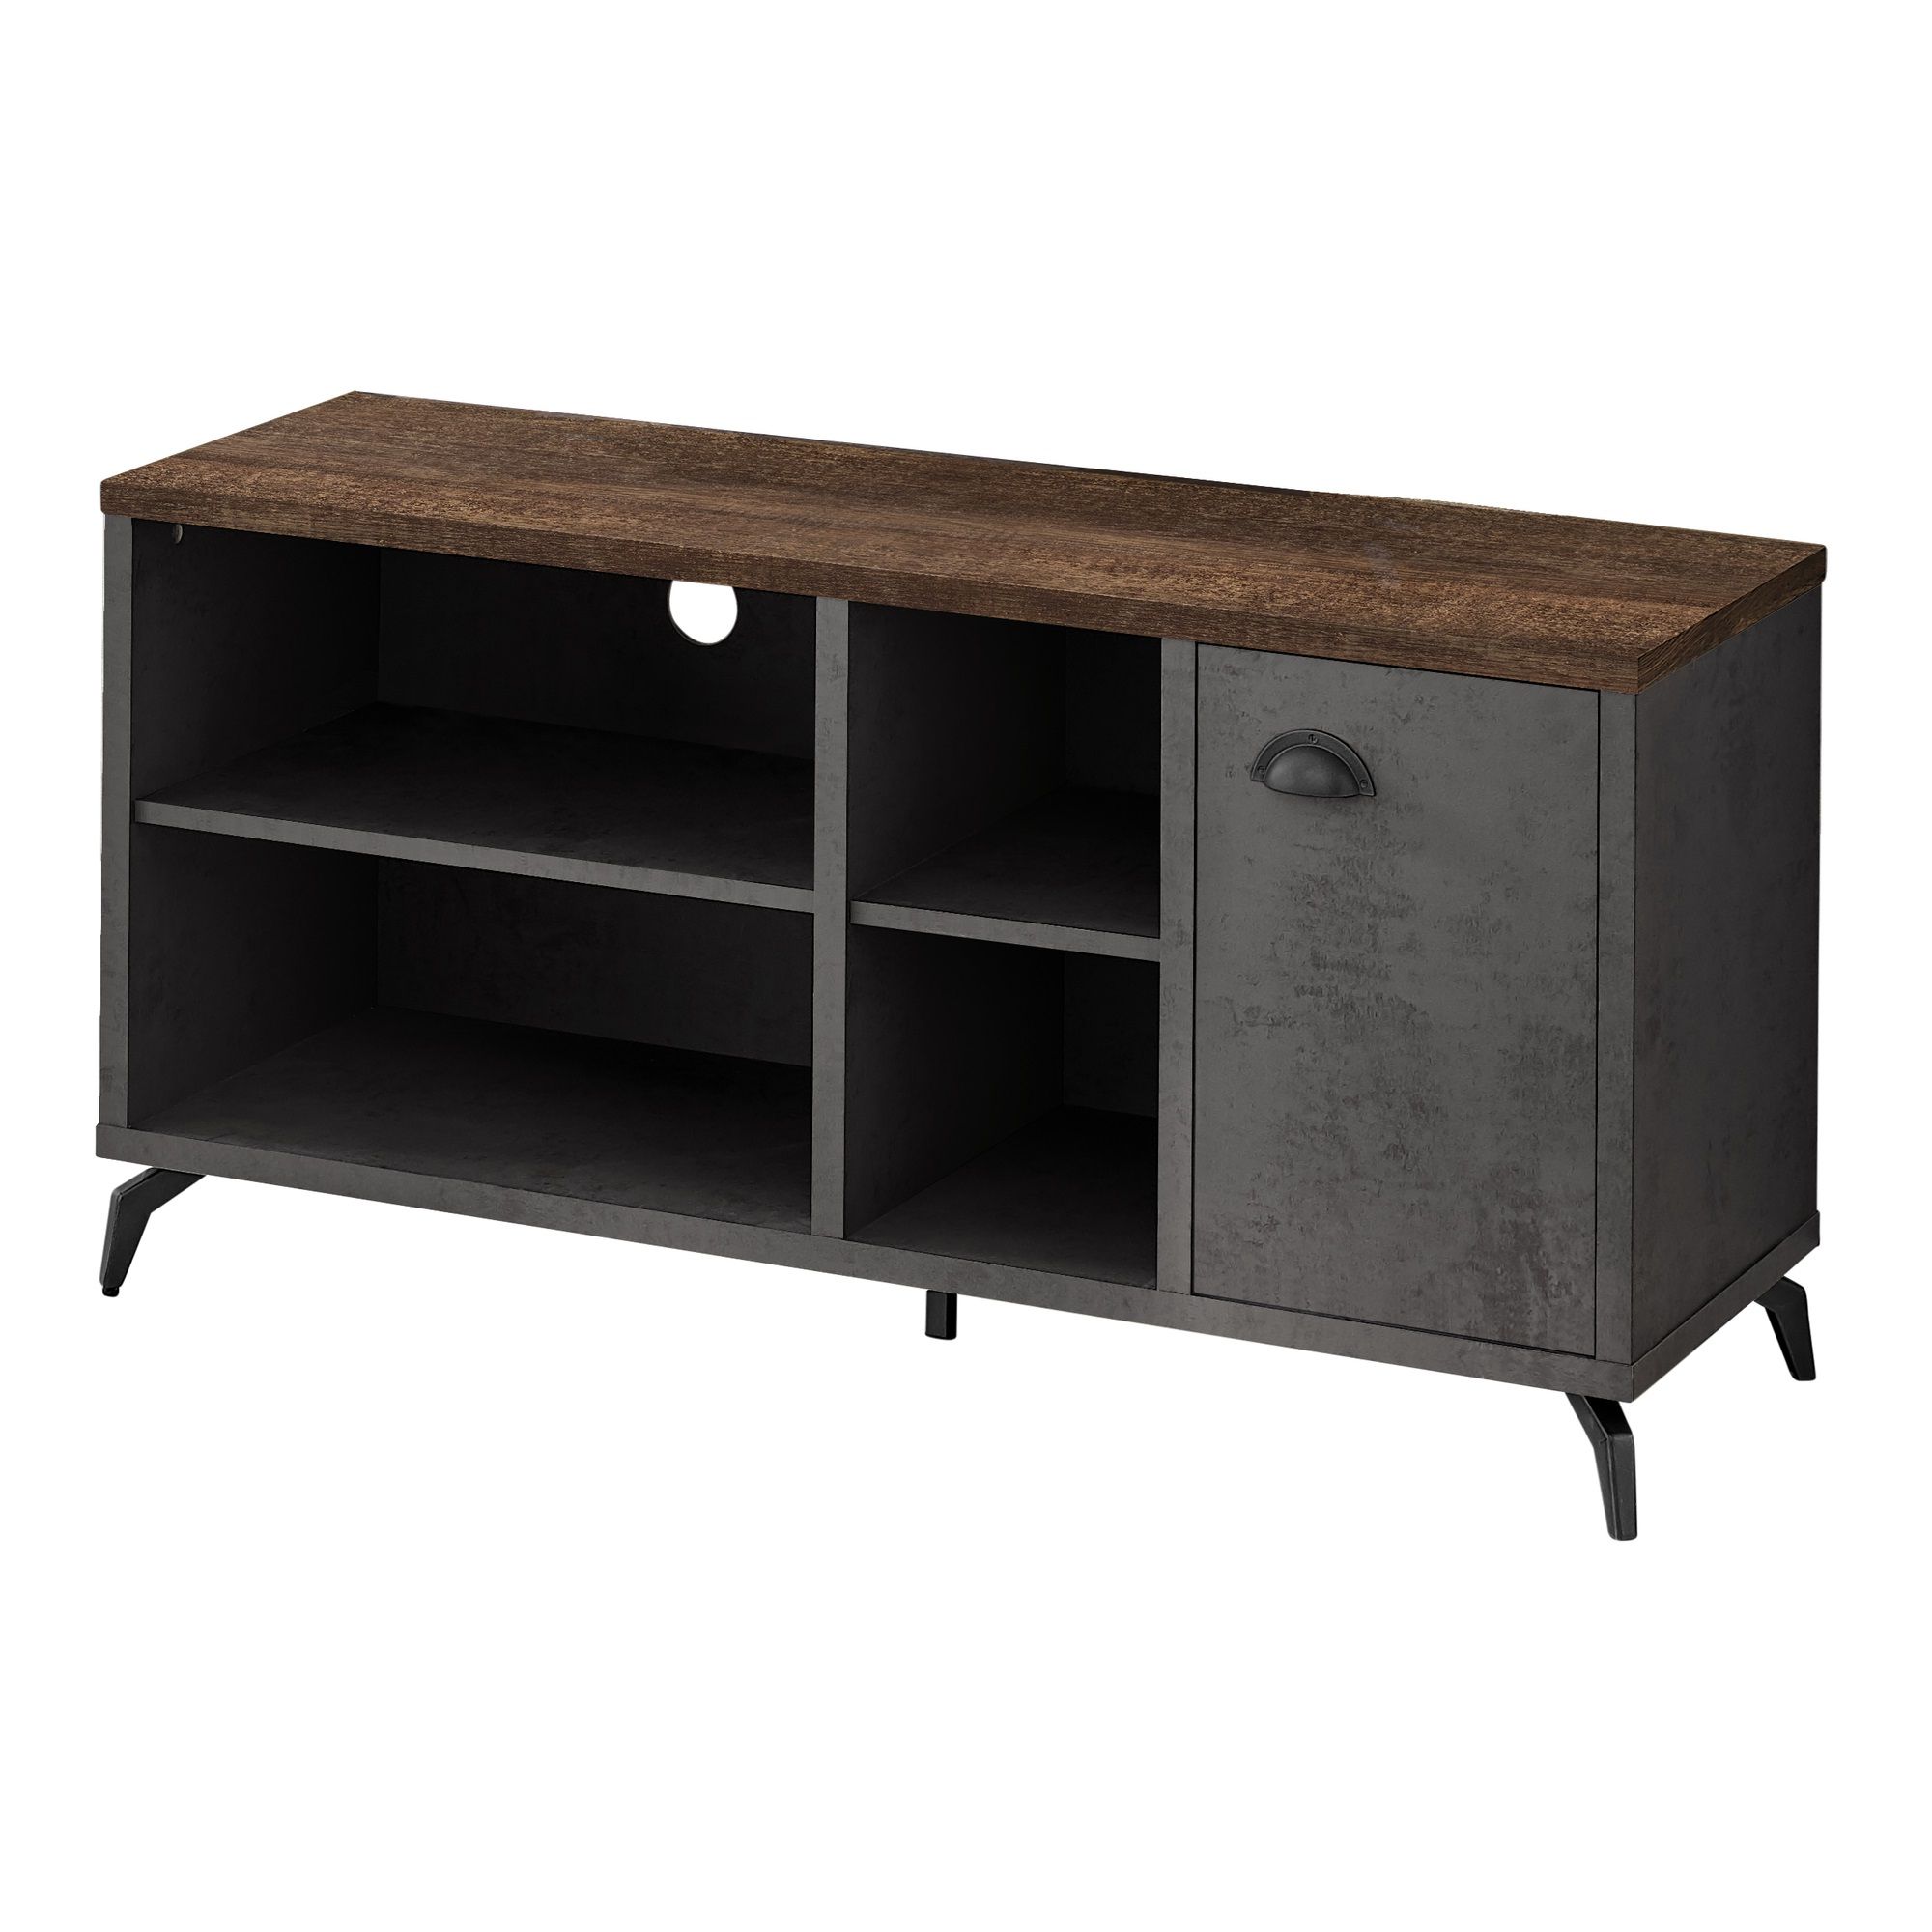 Industrial Faux Wood Tv Stands Regarding Well Known Monarch Specialties Tv Stand – 1 Door / 4 Shelves / Two Tone Finish – 48" L  – Grey Faux Concrete / Brown Reclaimed Wood Look – Walmart (View 10 of 10)